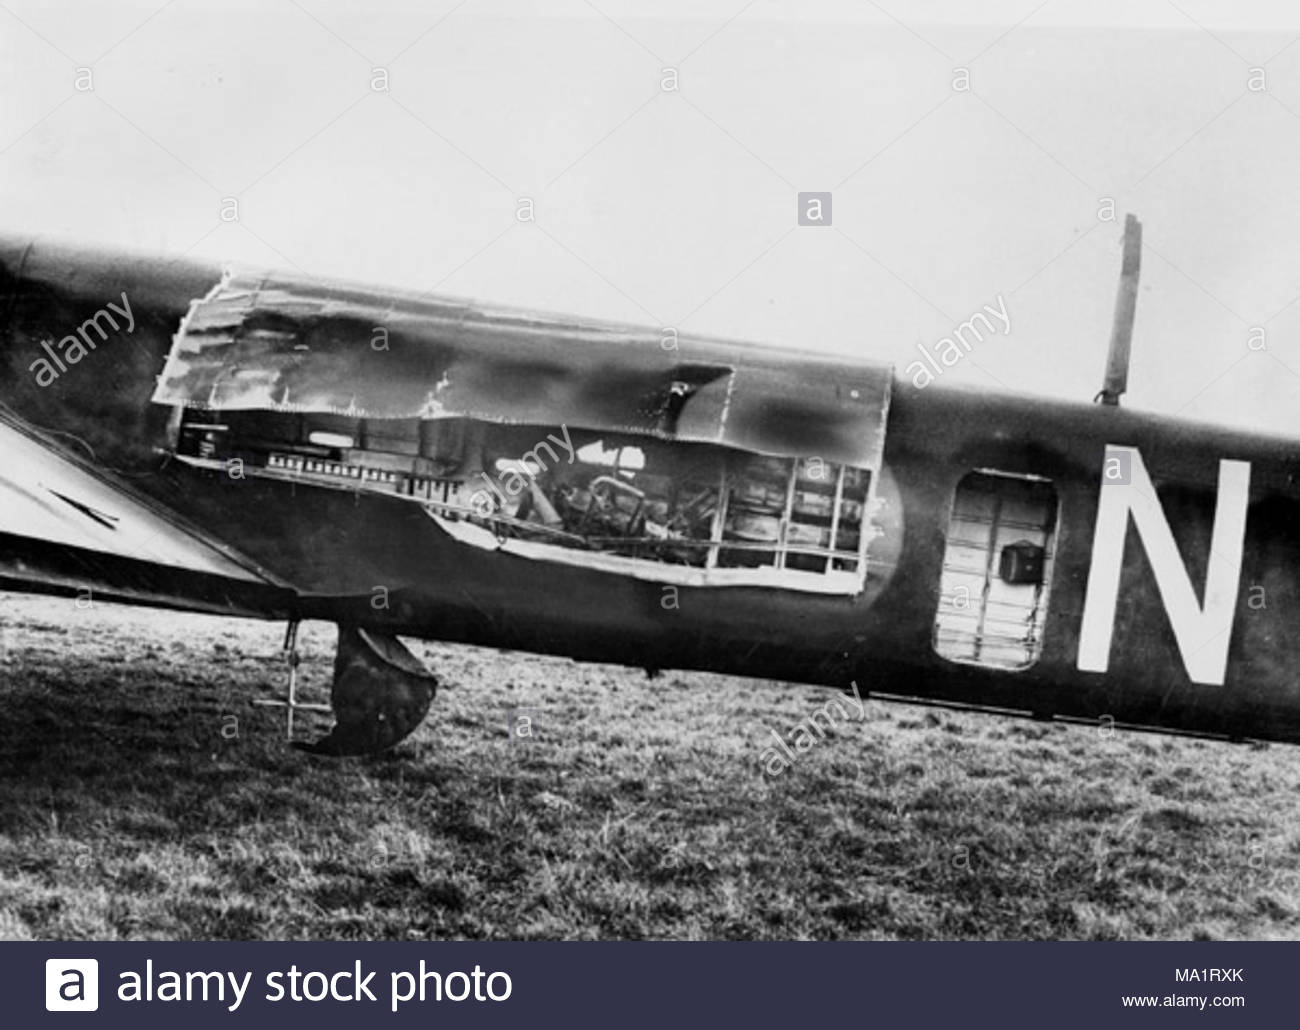 Armstrong Whitworth Whitley Bomber Stock Photos & Armstrong Whitworth ...